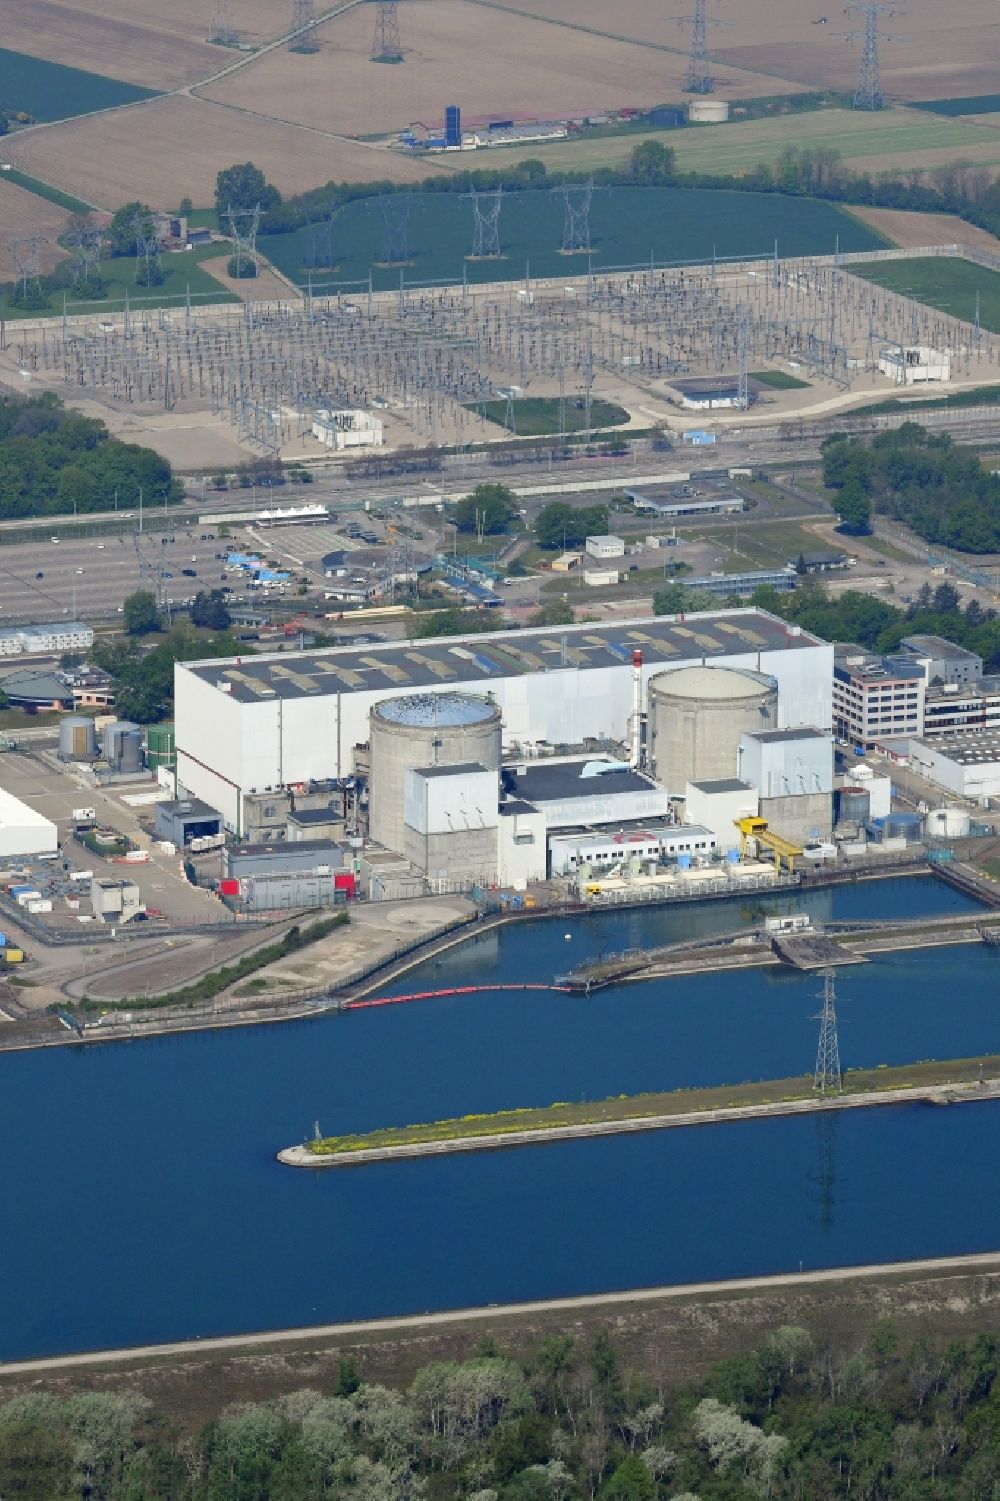 Aerial image Fessenheim - The nuclear power plant in Fessenheim in France on the Upper Rhine on the shore of the Grand Canal d'Alsace is the oldest nuclear power plant in France